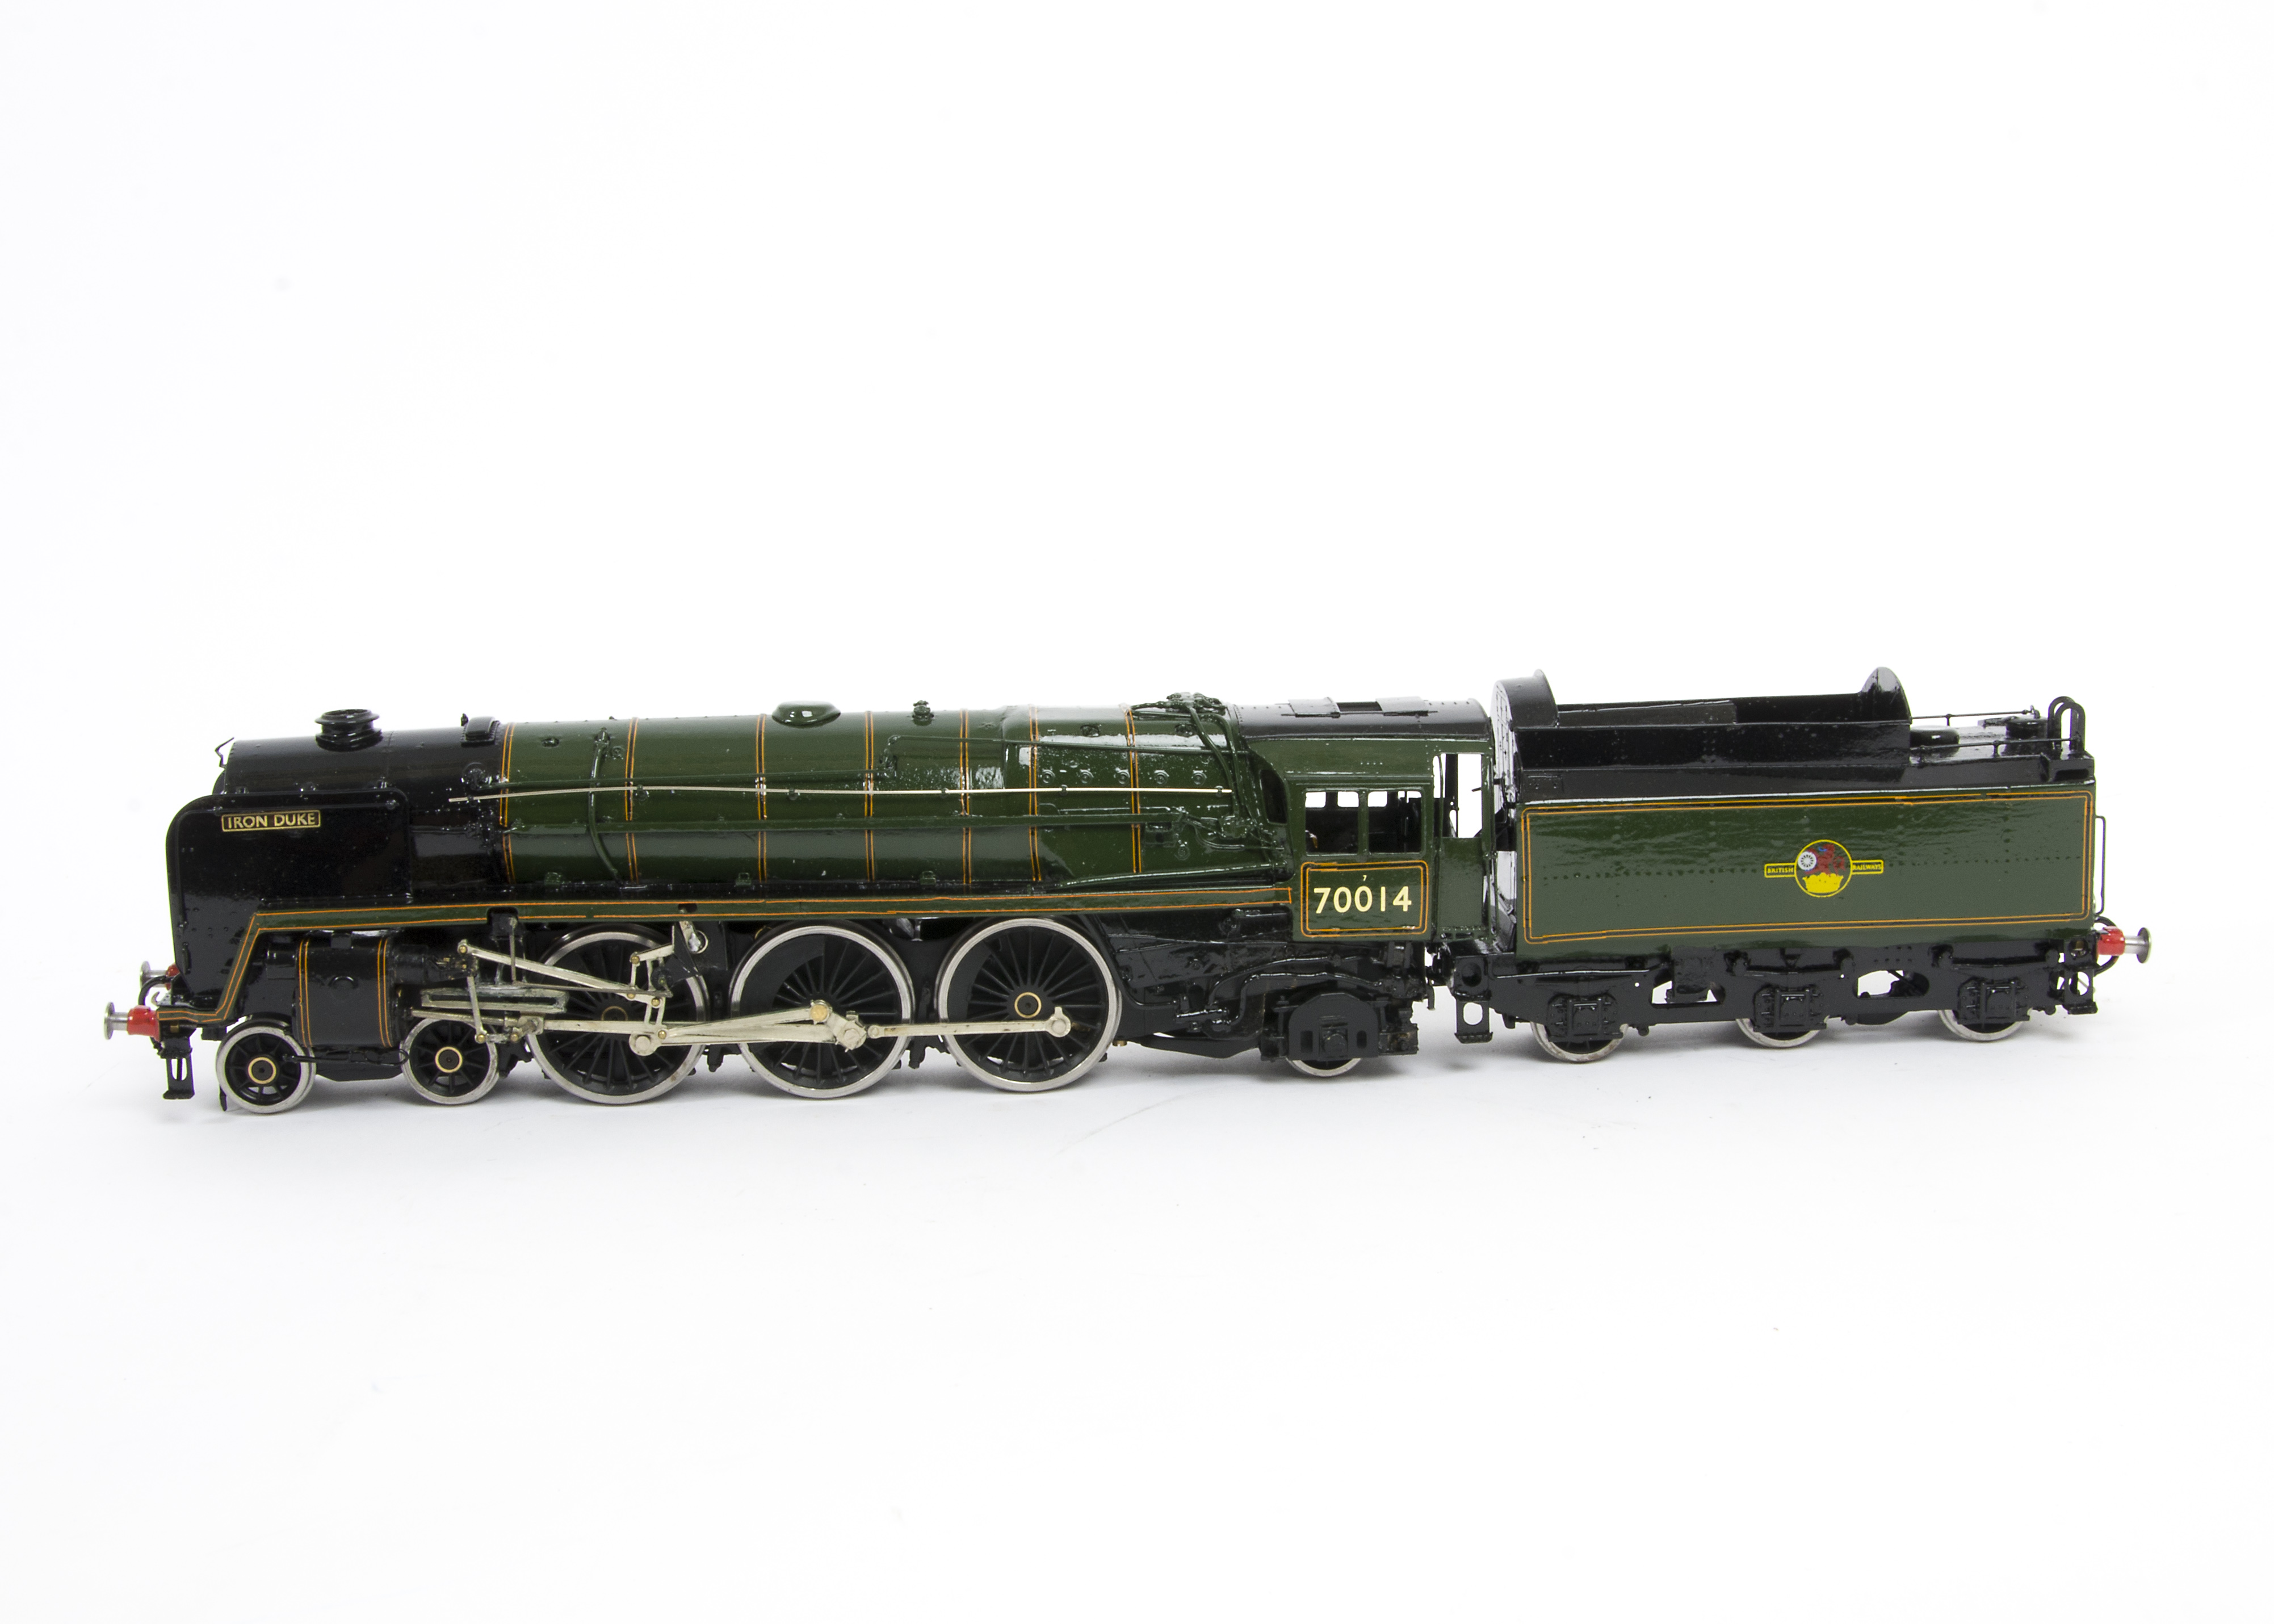 A Made-up Finescale O Gauge BR Standard 'Britannia' Class Locomotive and Tender from Seven Models